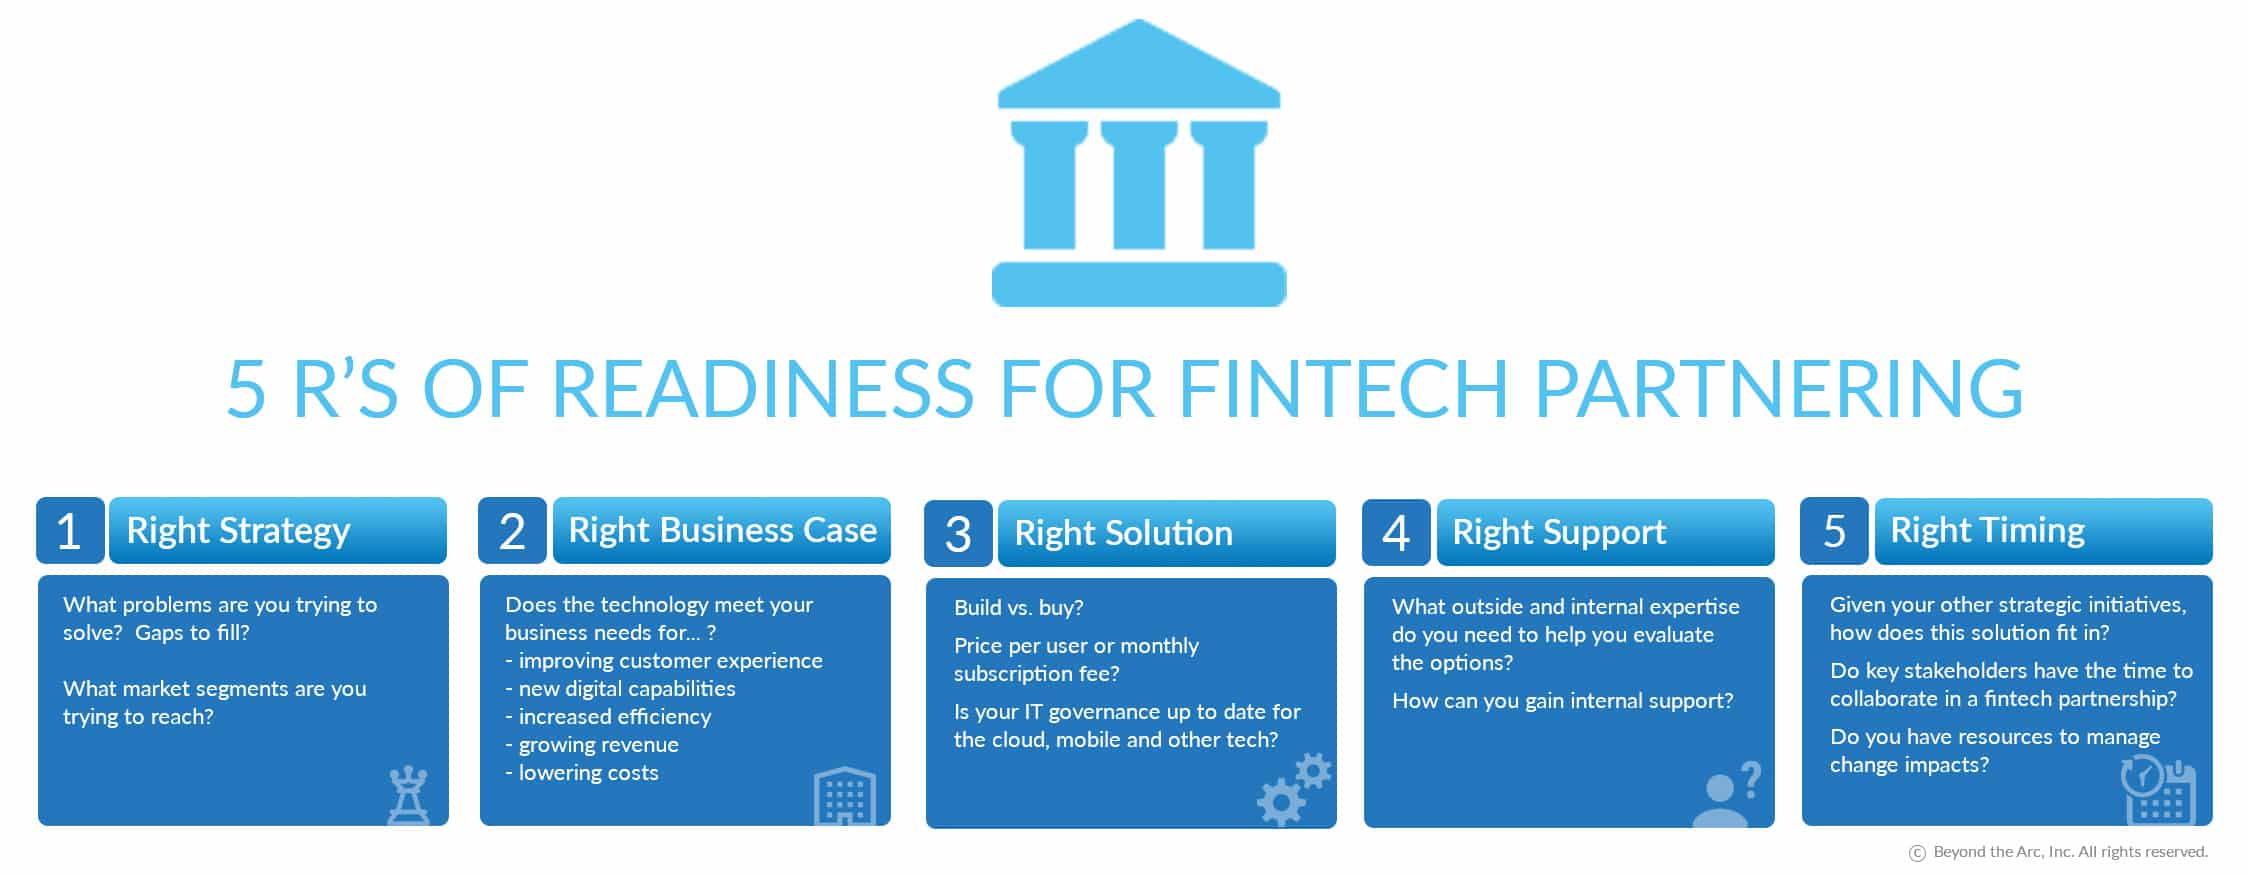 5 Rs of readiness for fintecth partnering